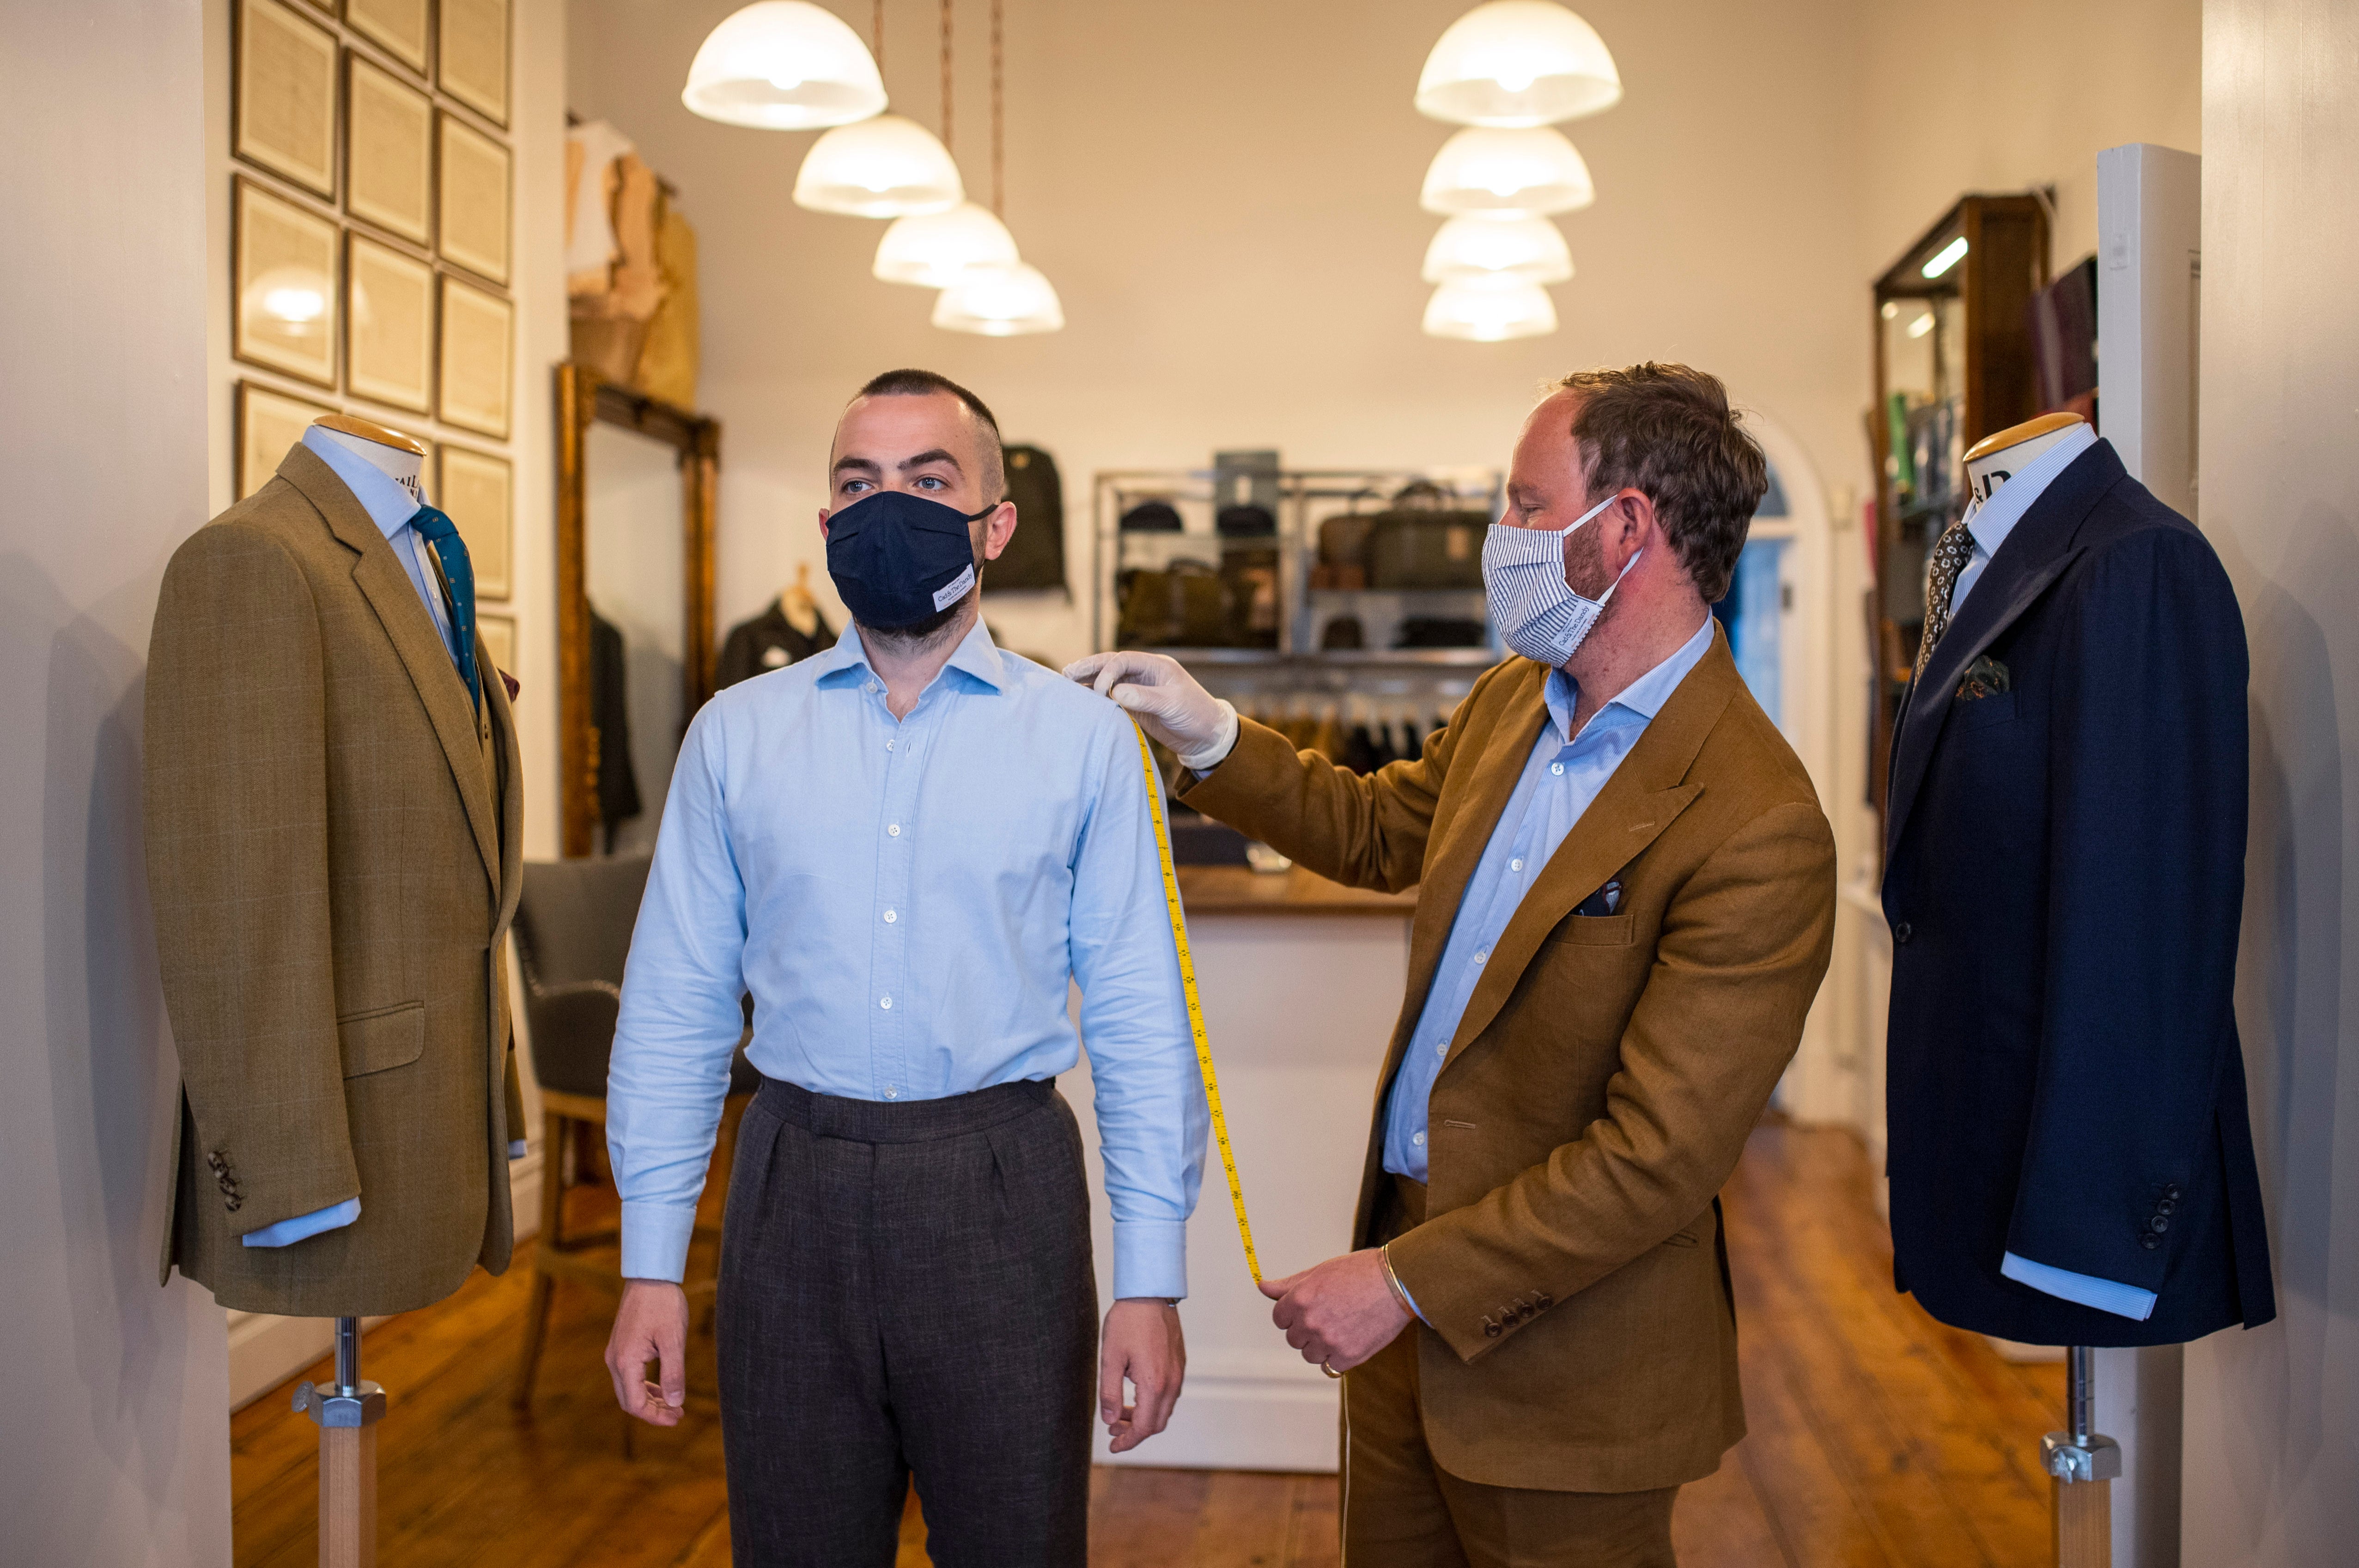 Customers have been able to return to Savile Row since June, but the diminished demand for formal wear means footfall is still a fraction of what it once was